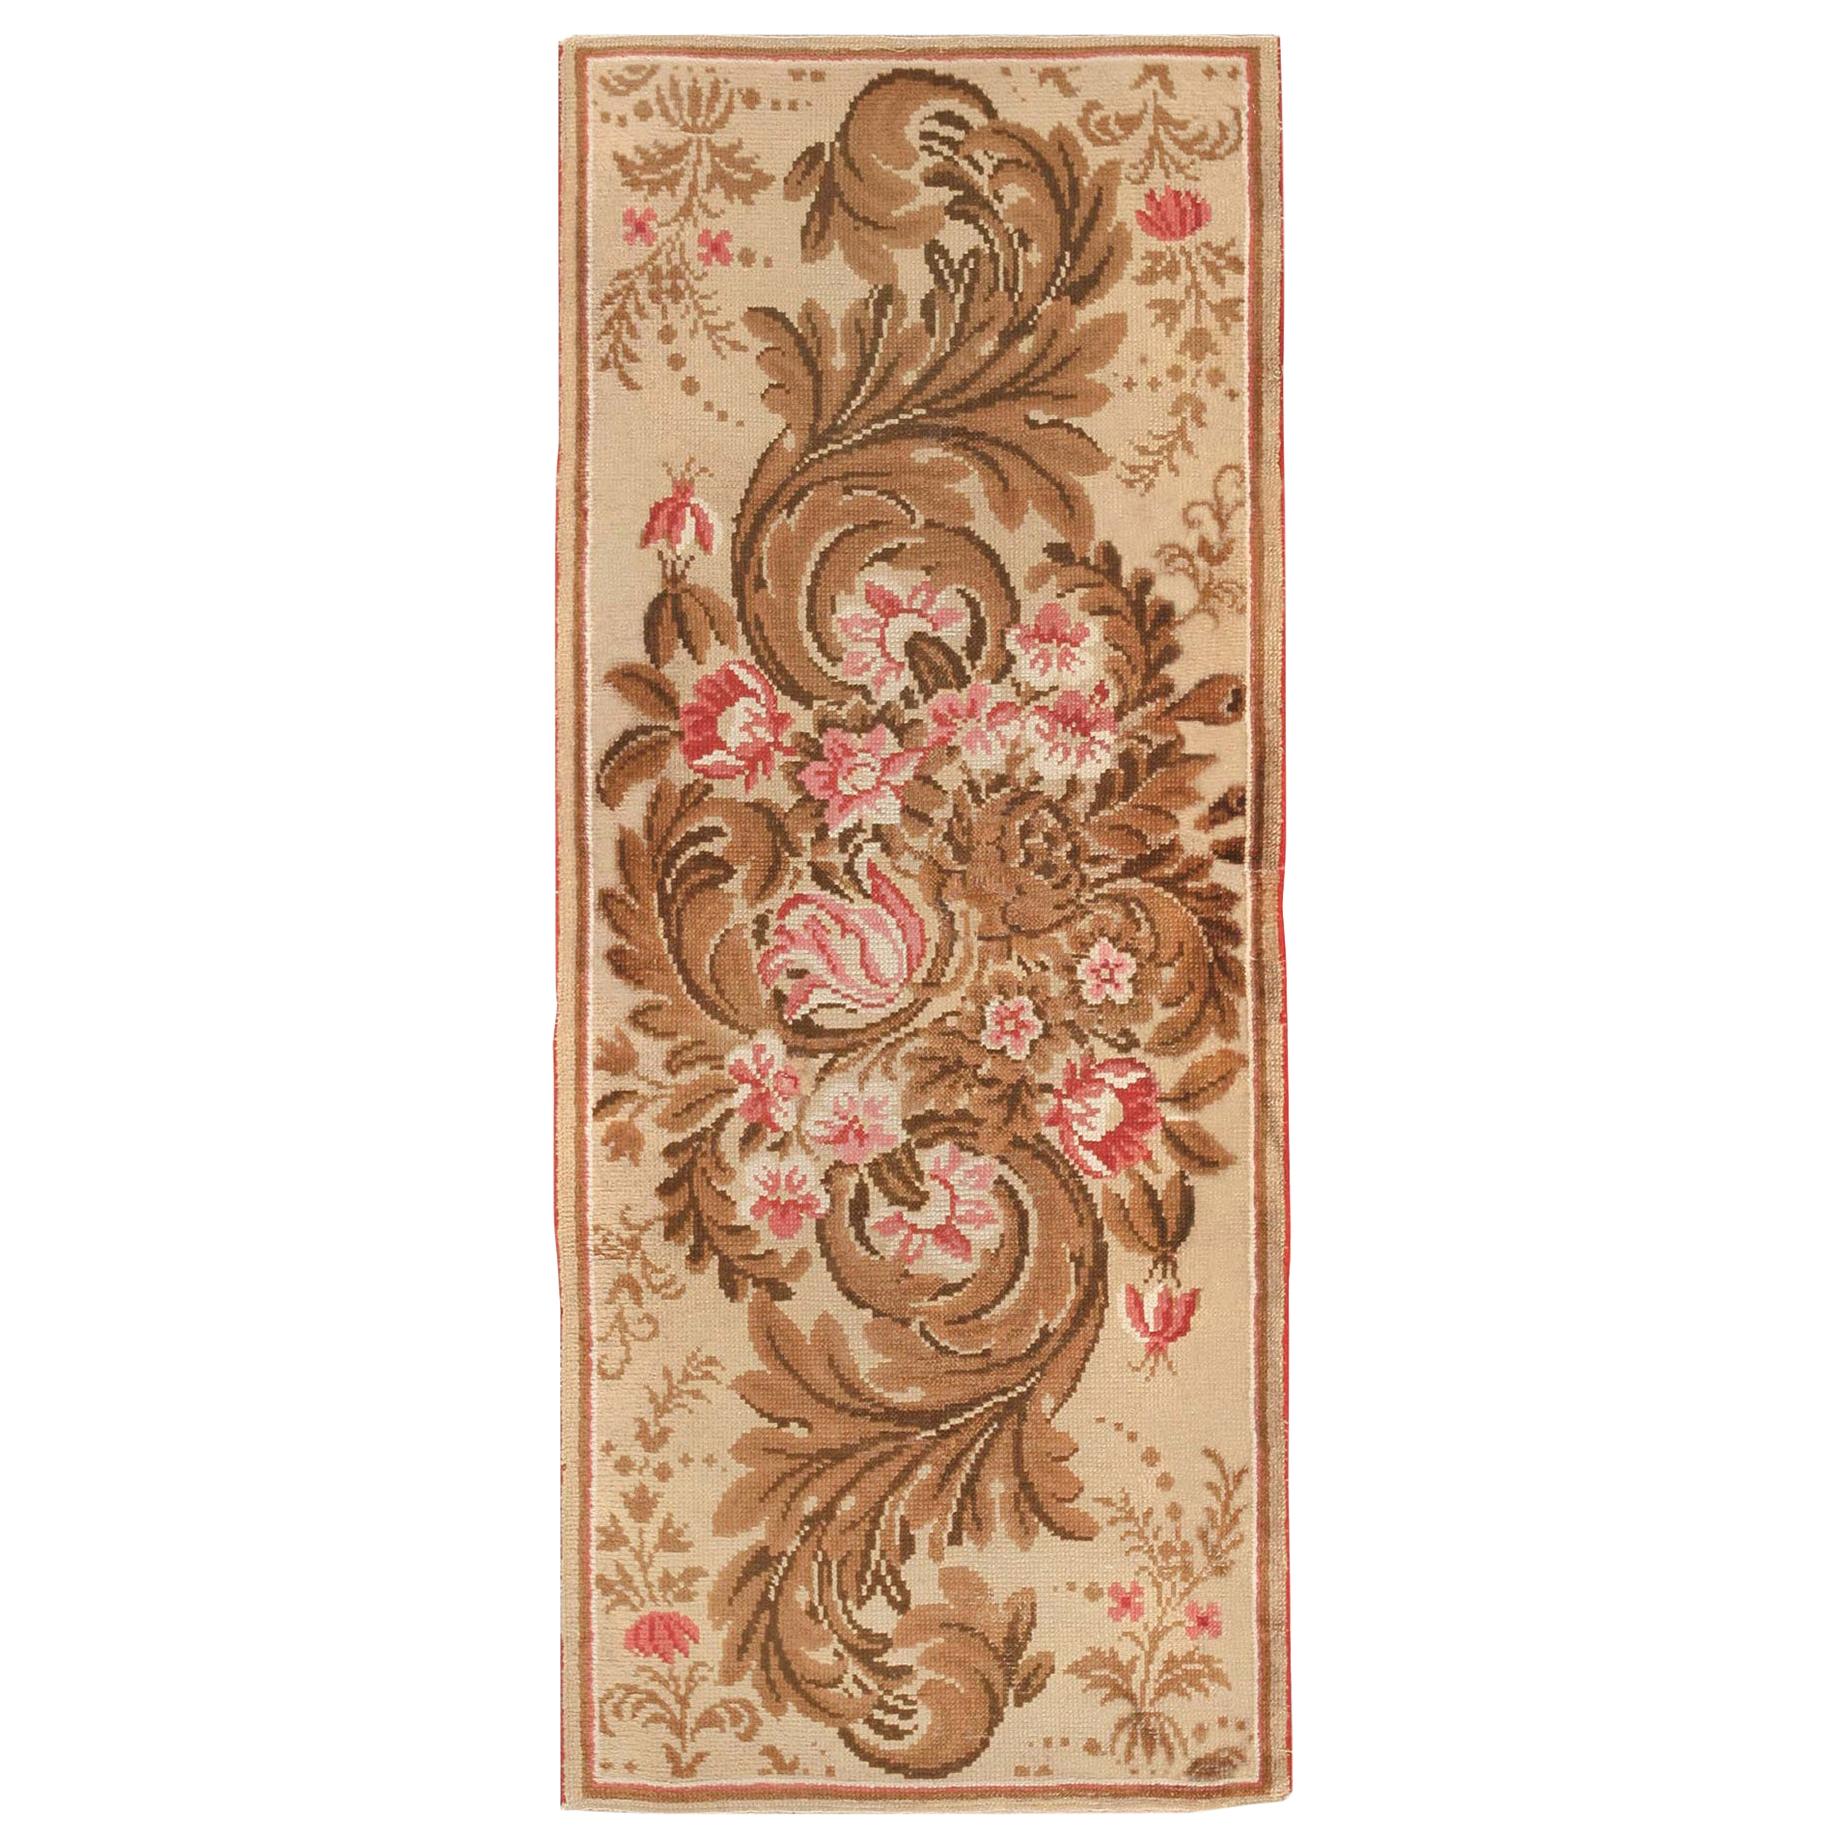 Nazmiyal Collection Antique English Rug. Size: 2 ft 6 in x 6 ft 3 in 